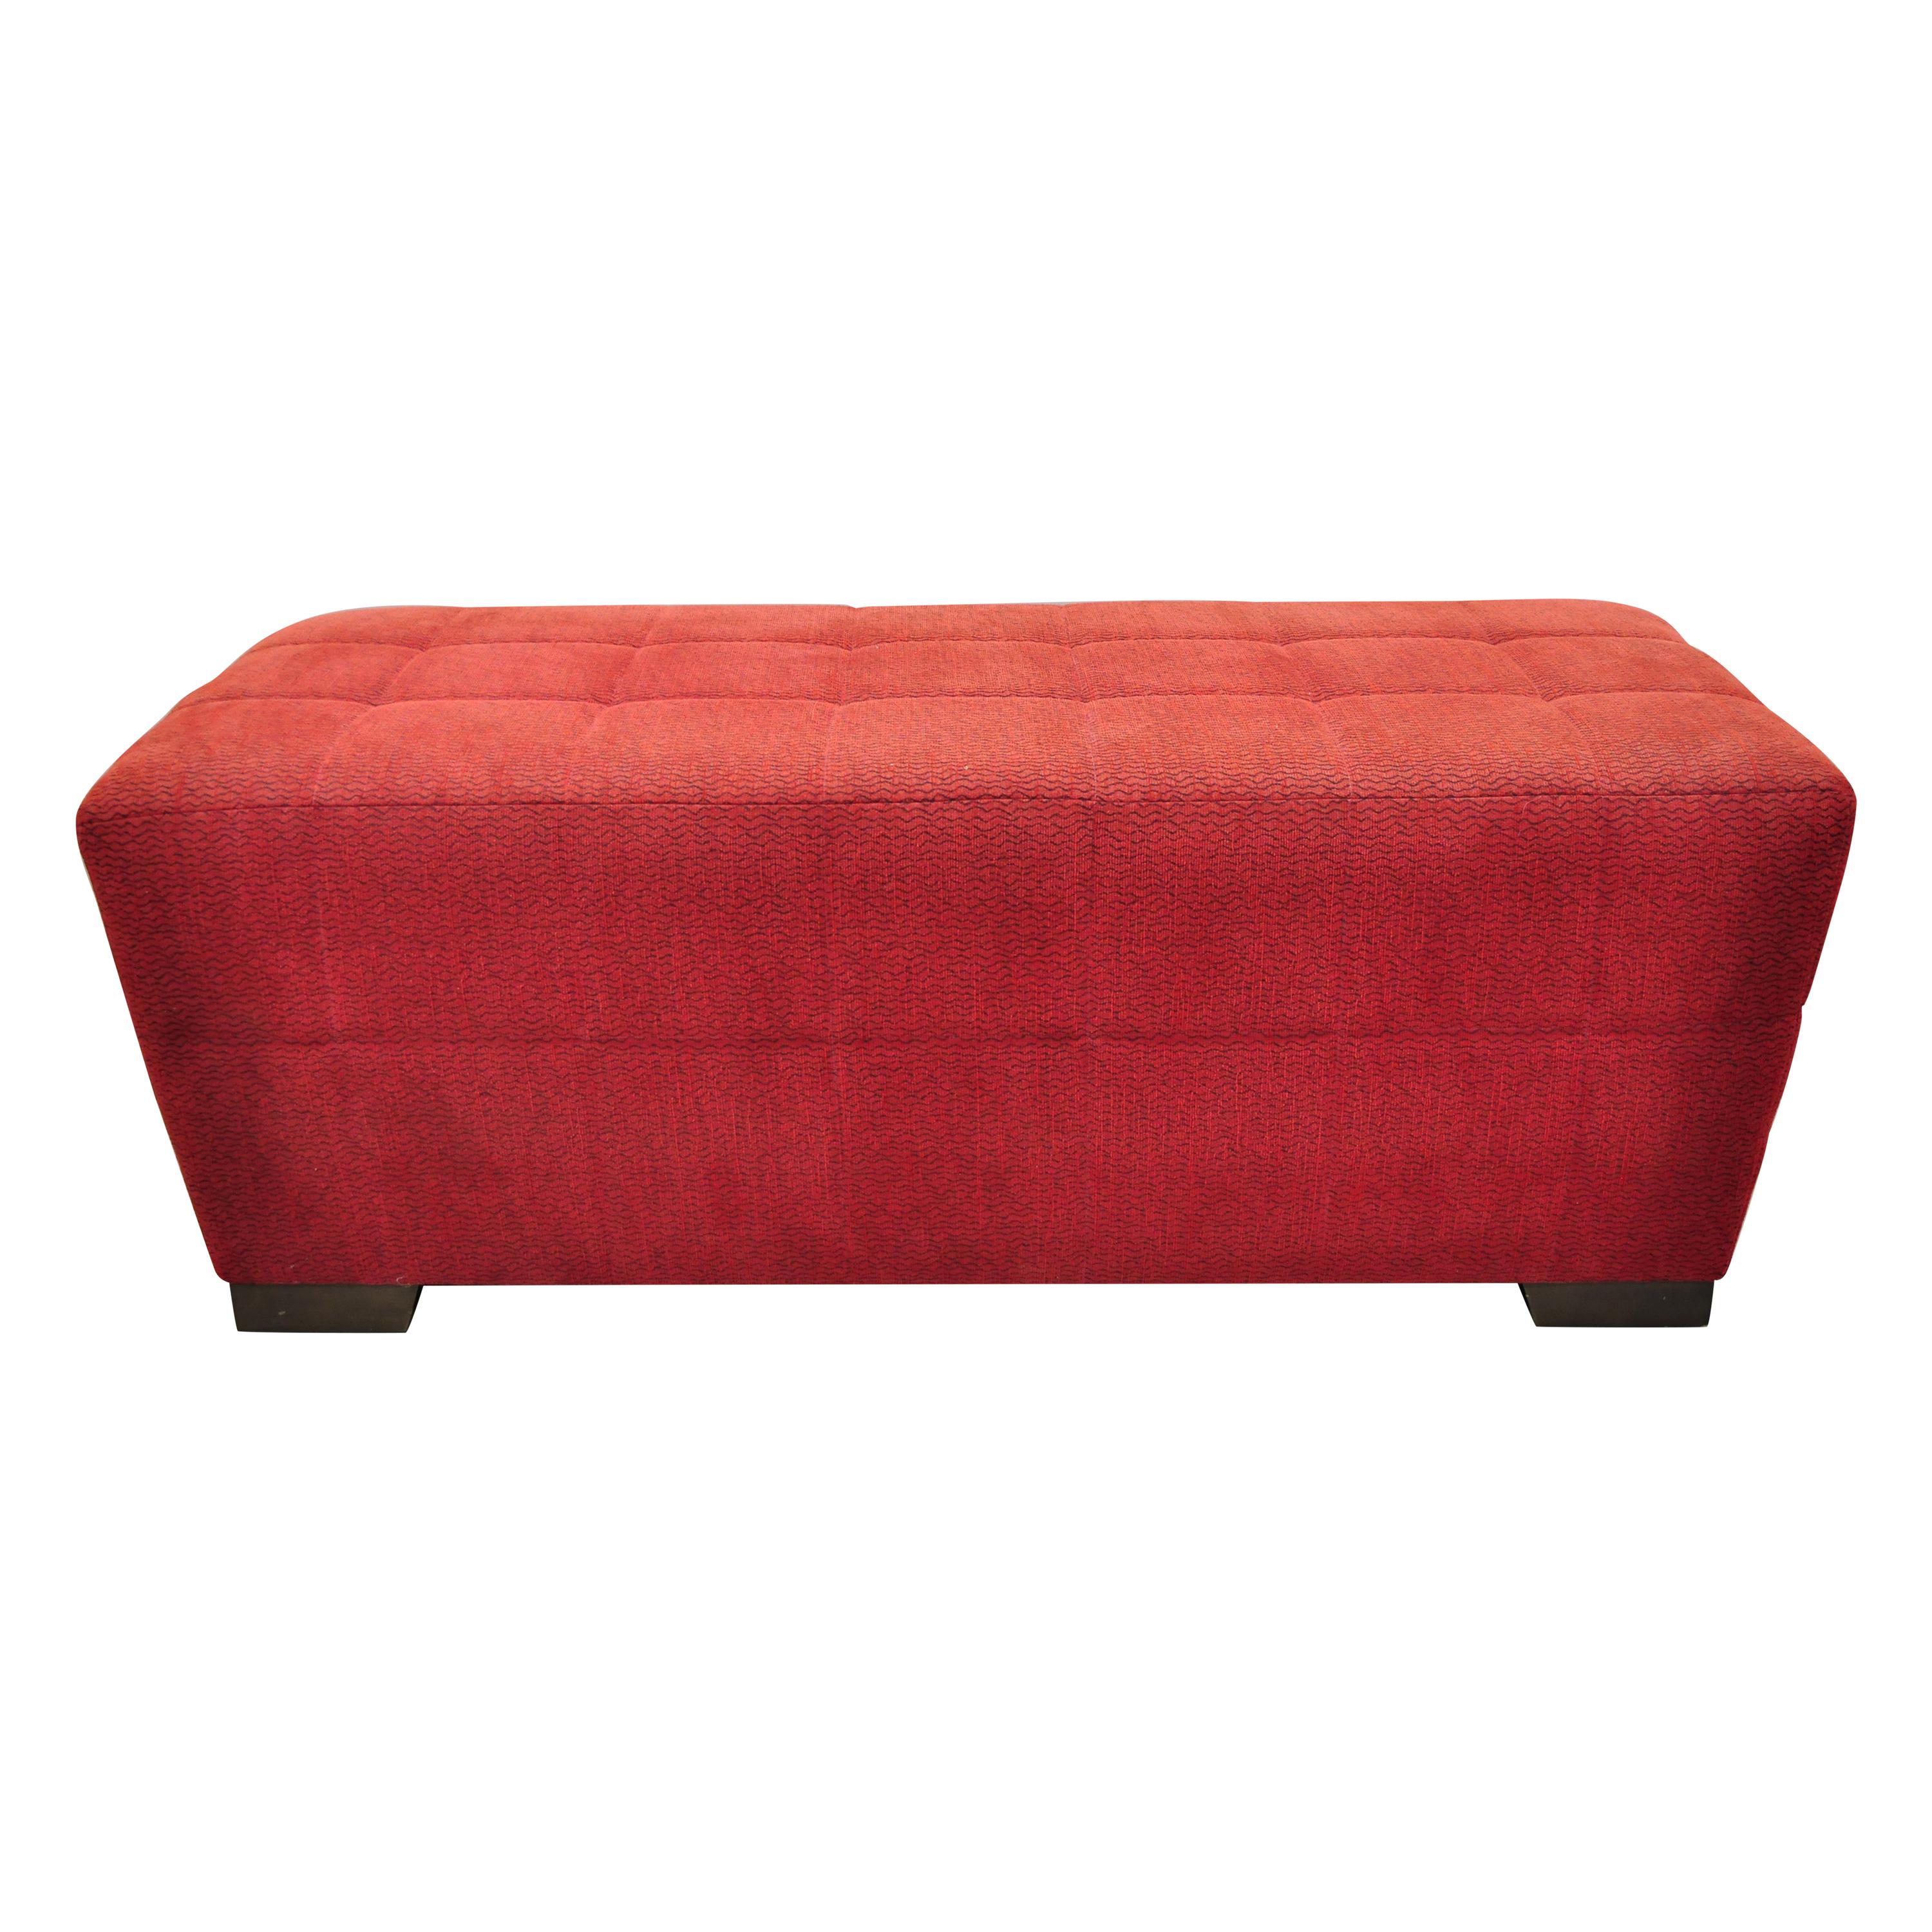 Directional Red Upholstered Large Modern Charles Bench Seat Ottoman For Sale